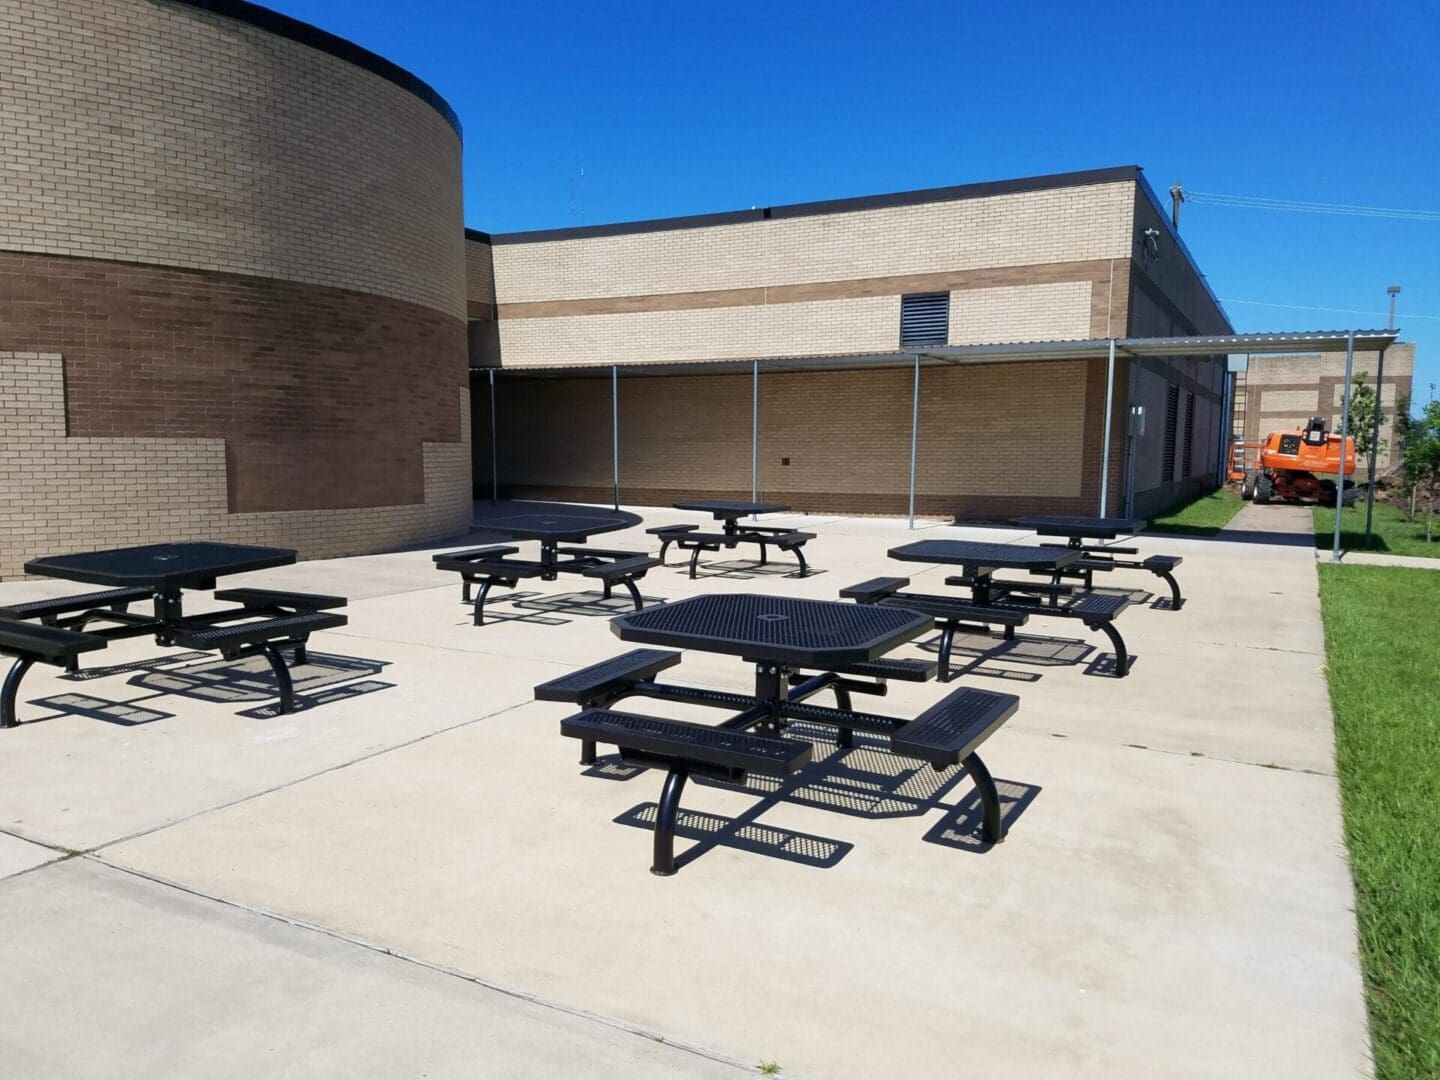 A group of picnic tables in the middle of an outdoor area.